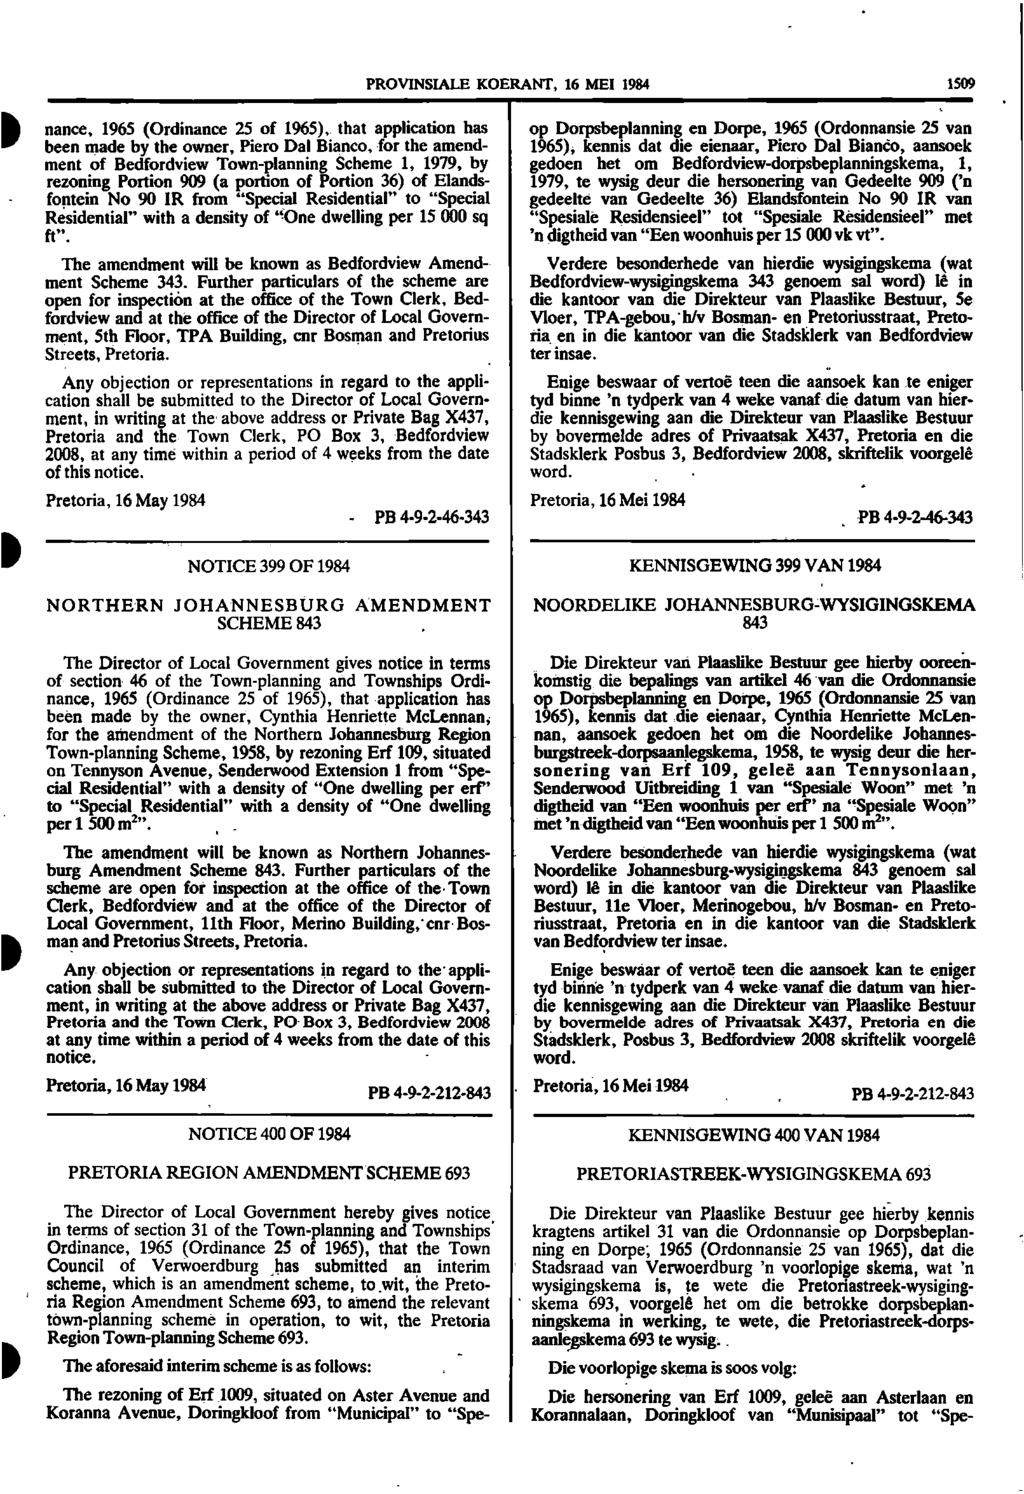 PROVINSIALE KOERANT, 16 MEI 1984 1509 nance, 1965 (Ordinance 25 of 1965), that application has been made by the owner, Piero Dal Bianco, for the amendment of Bedfordview Town-planning Scheme 1, 1979,